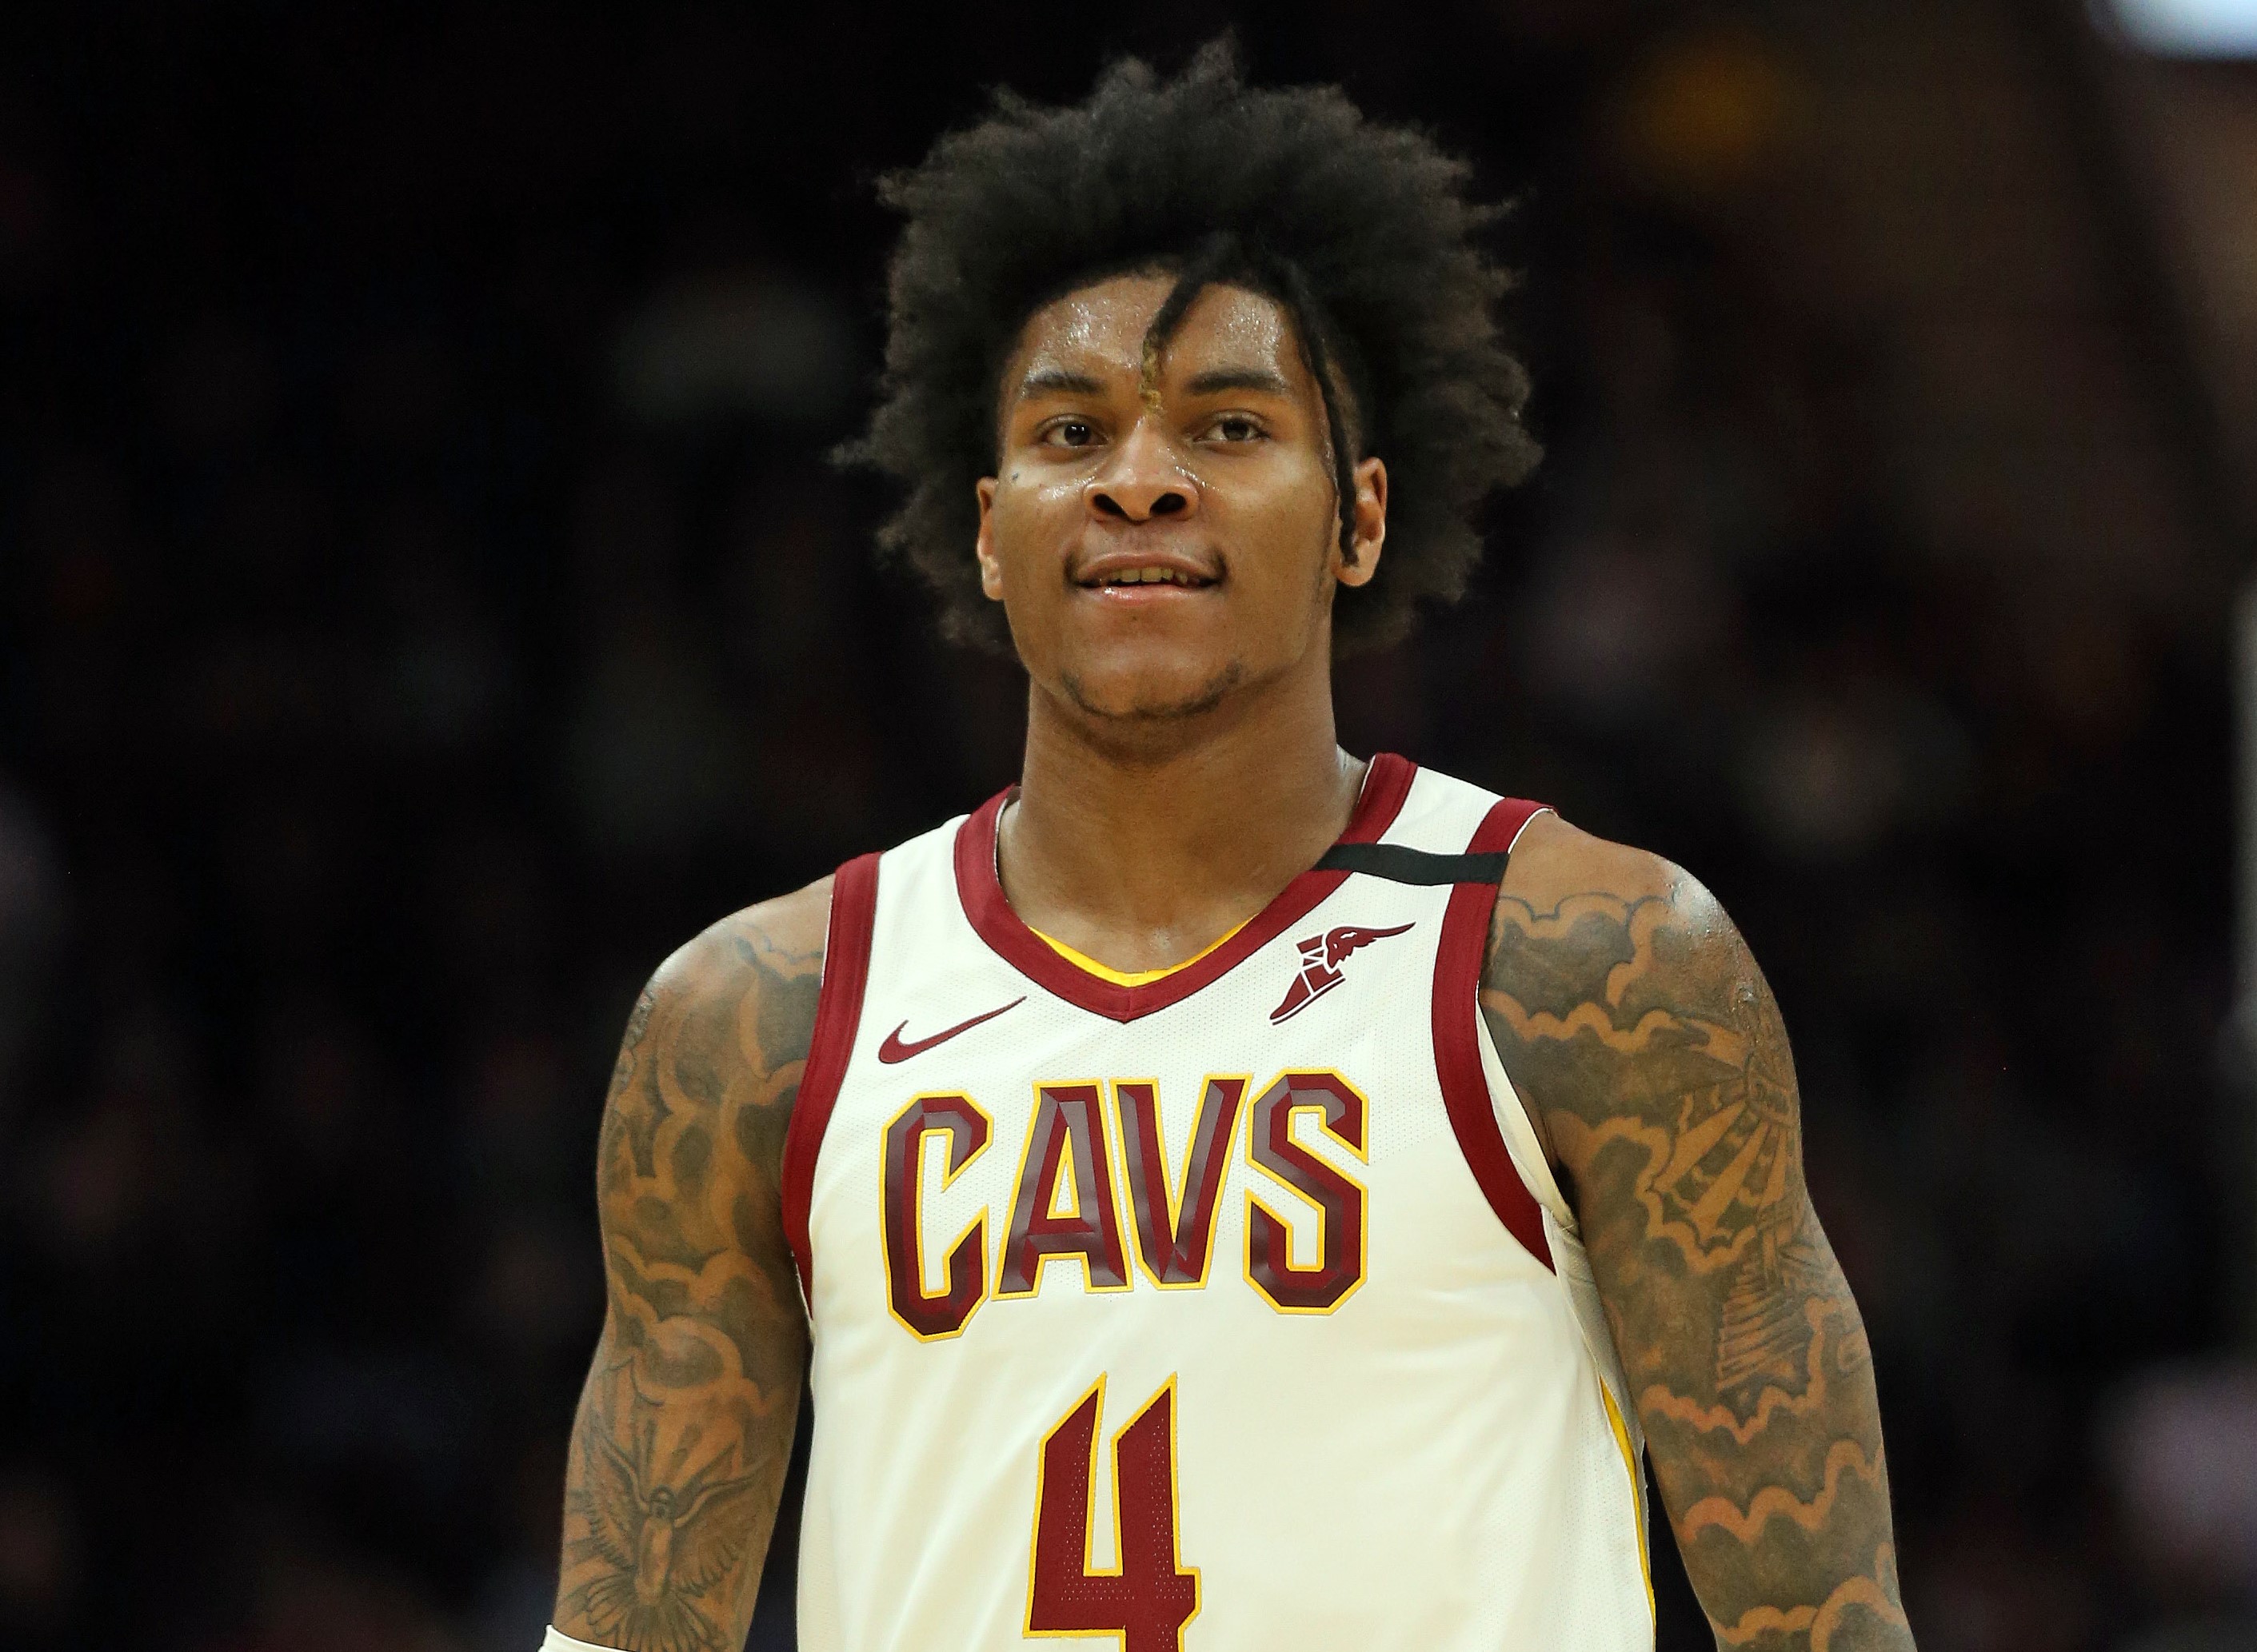 The cleveland cavaliers have selected kevin porter jr. 